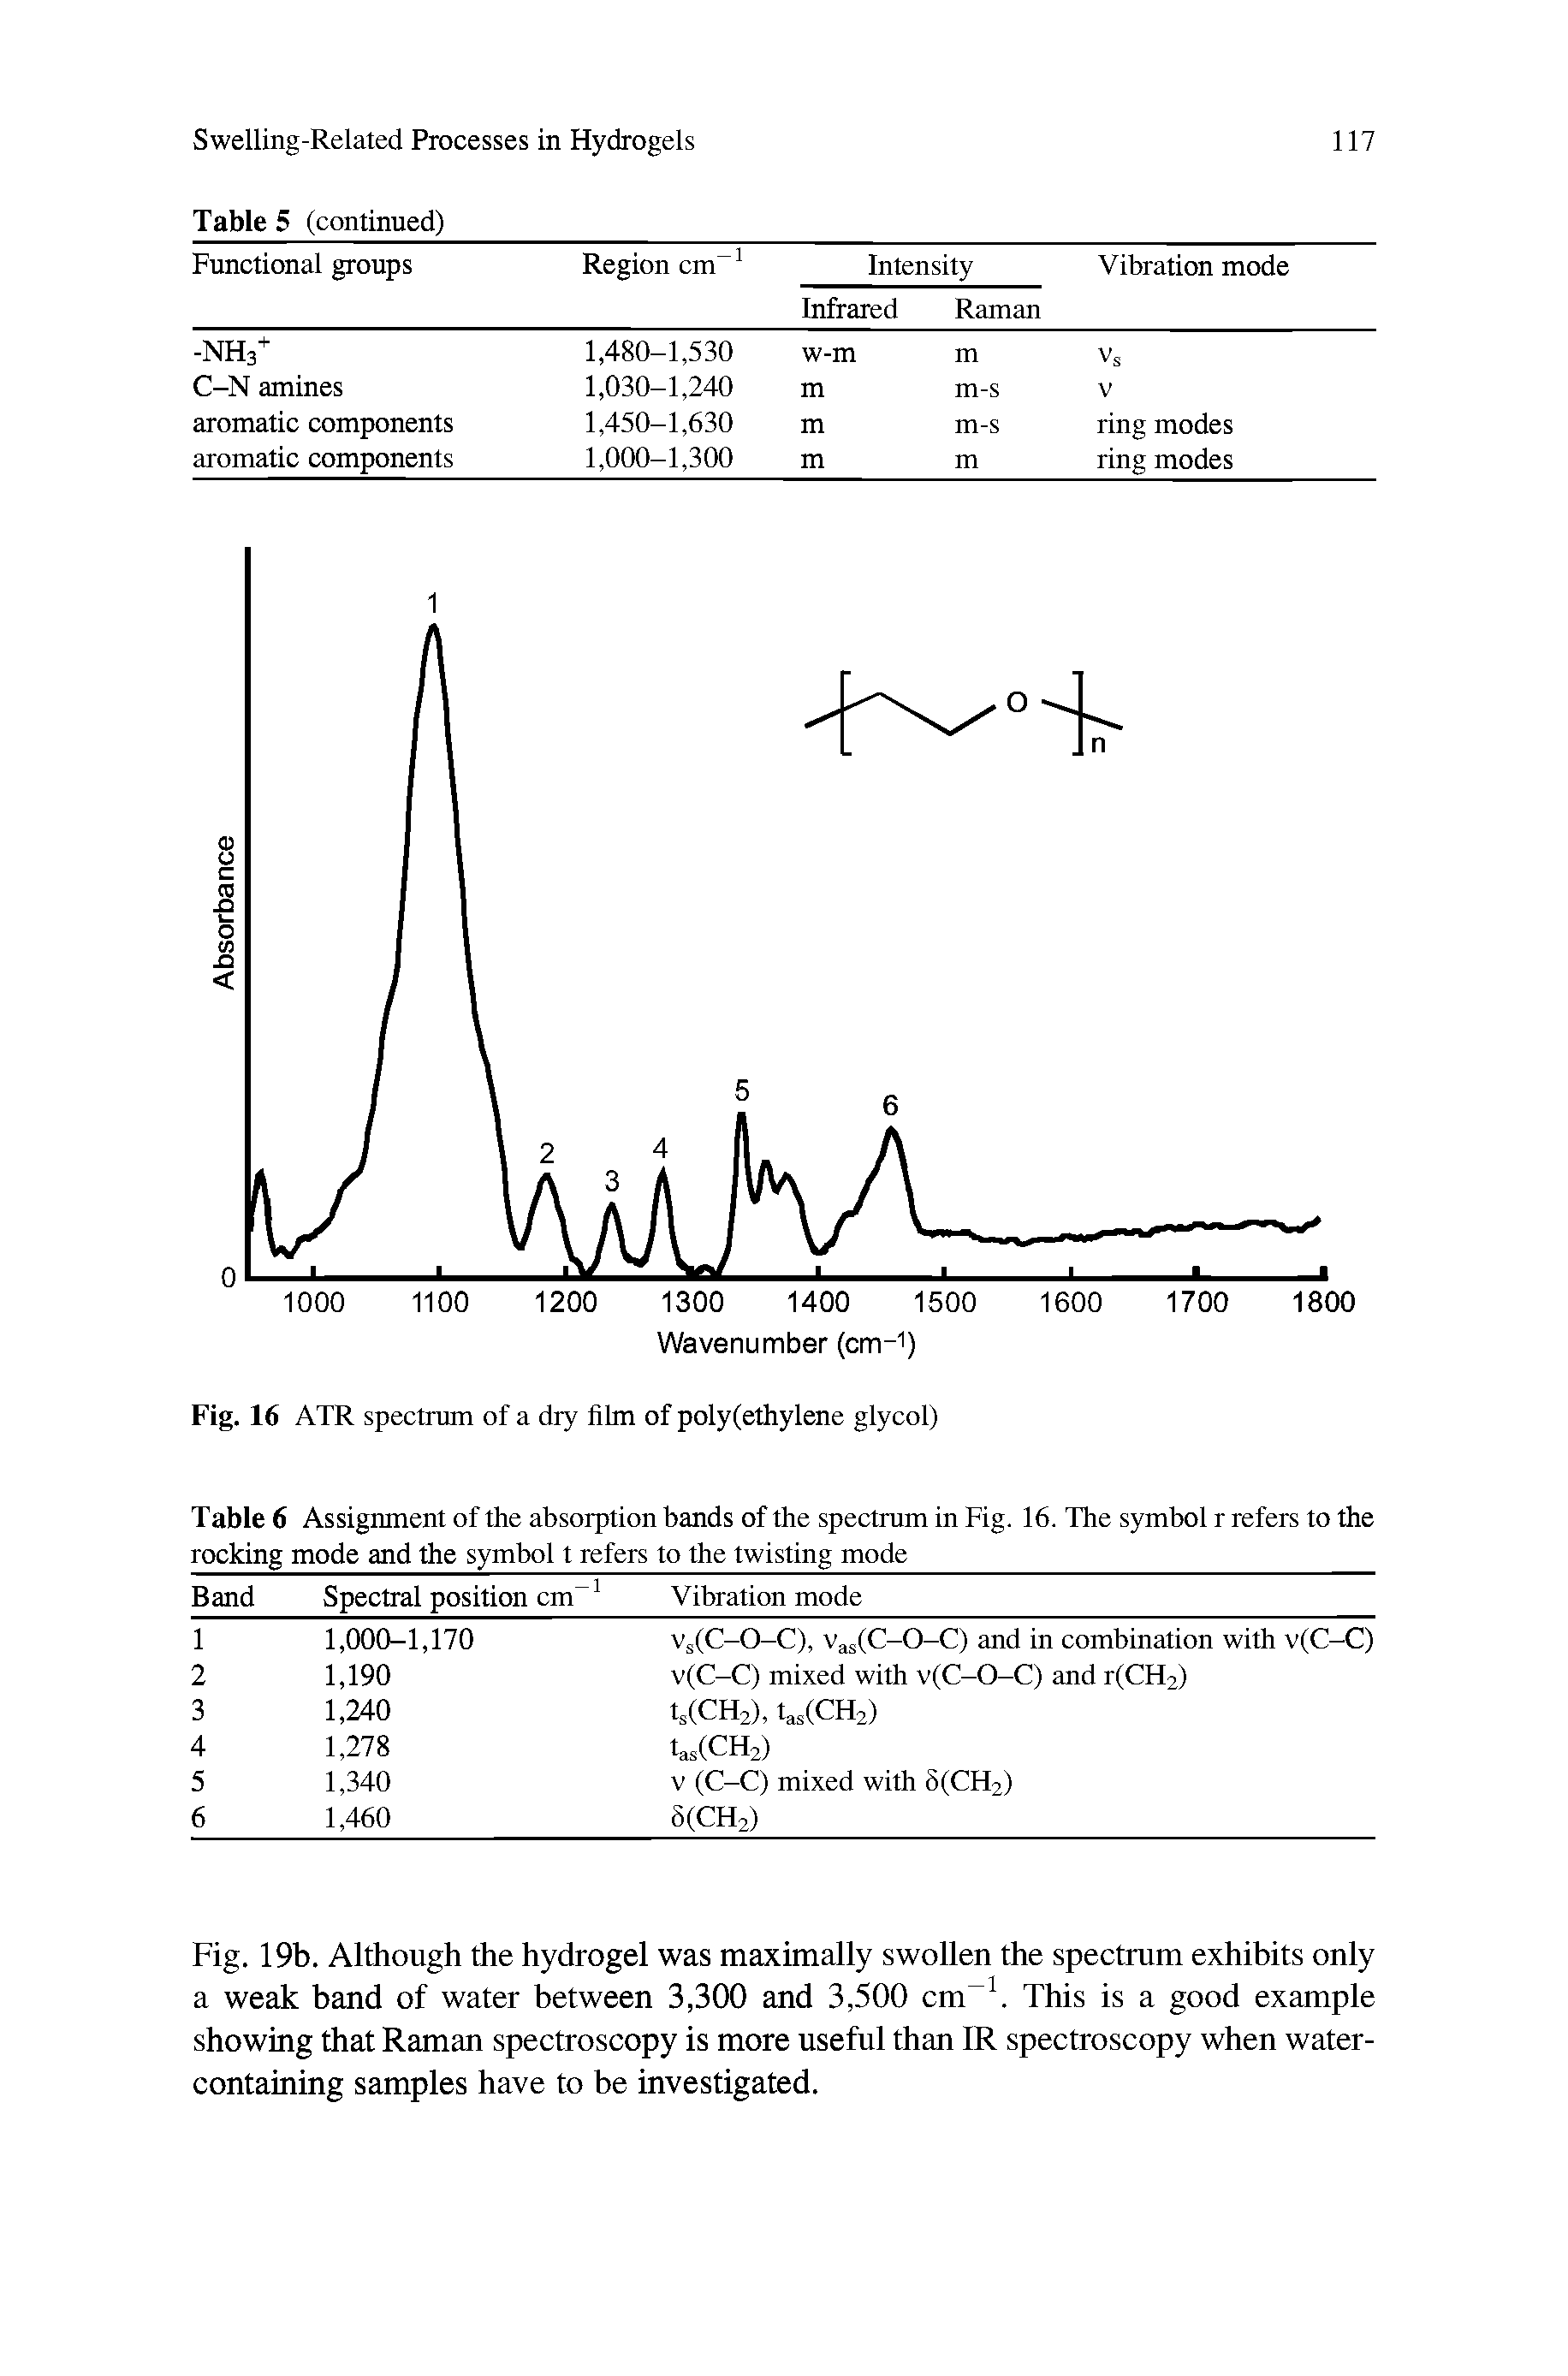 Table 6 Assignment of the absorption bands of the spectrum in Fig. 16. The symbol r refers to the rocking mode and the symbol t refers to the twisting mode...